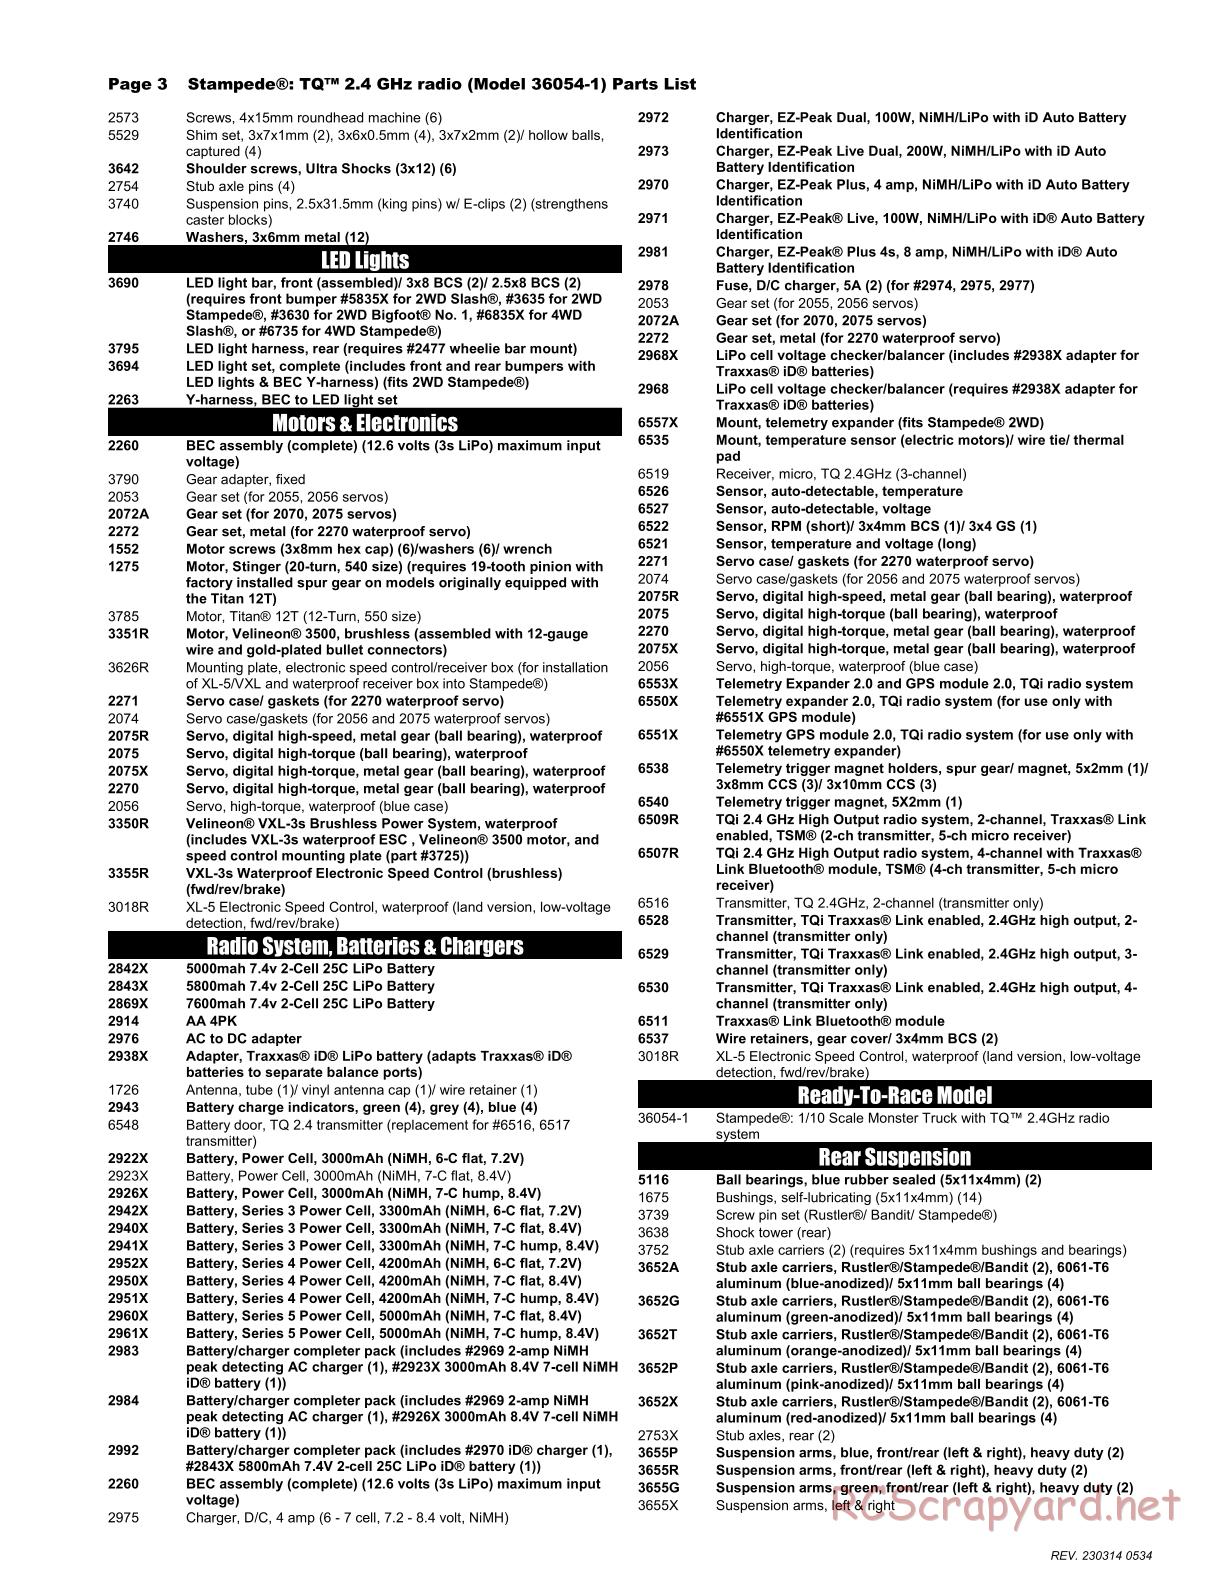 Traxxas - Stampede XL-5 (2018) - Parts List - Page 3